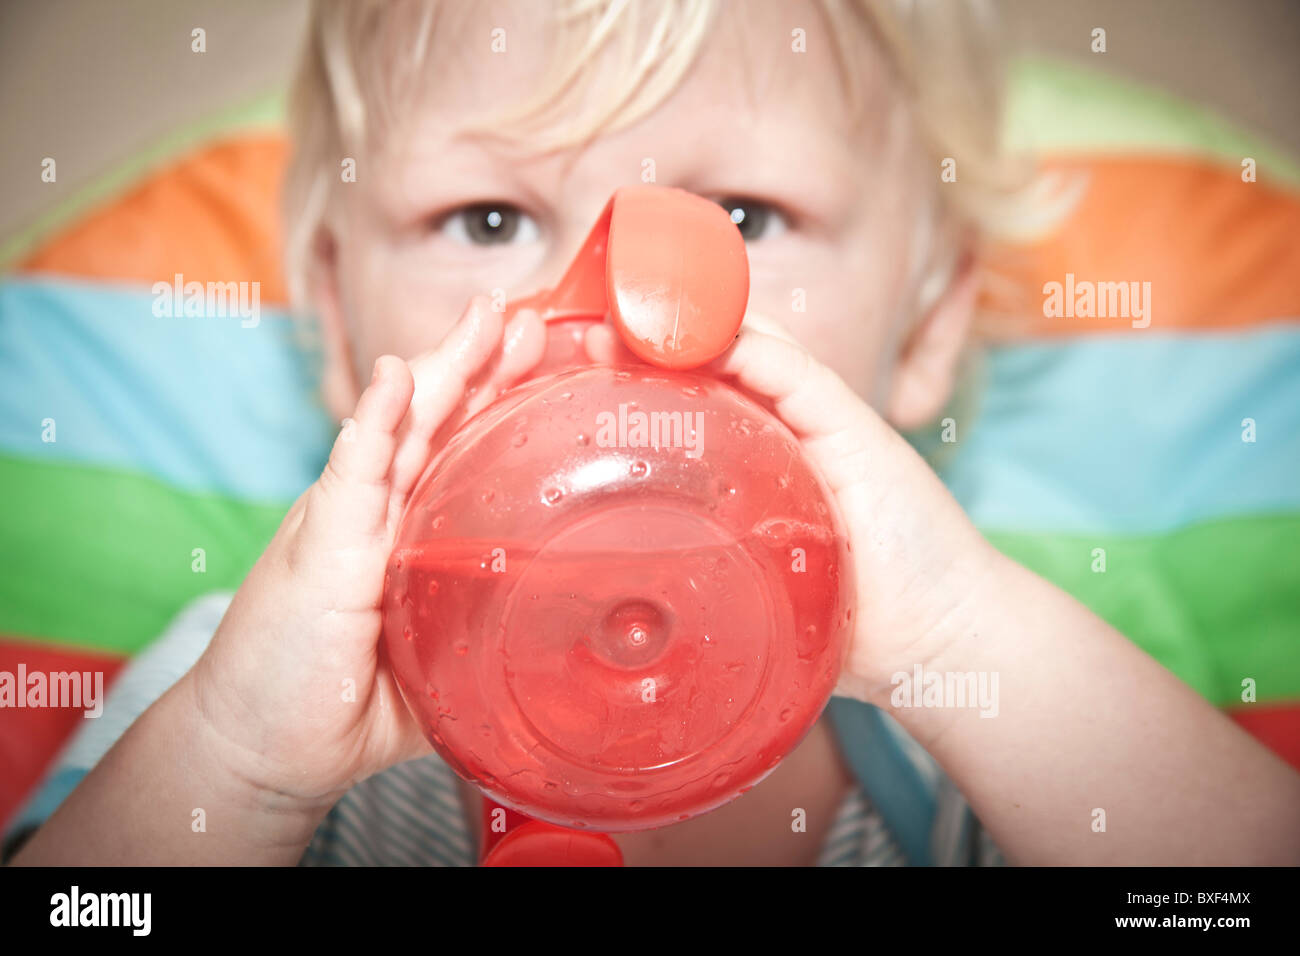 https://c8.alamy.com/comp/BXF4MX/child-drinking-from-a-toddler-drinking-cup-BXF4MX.jpg